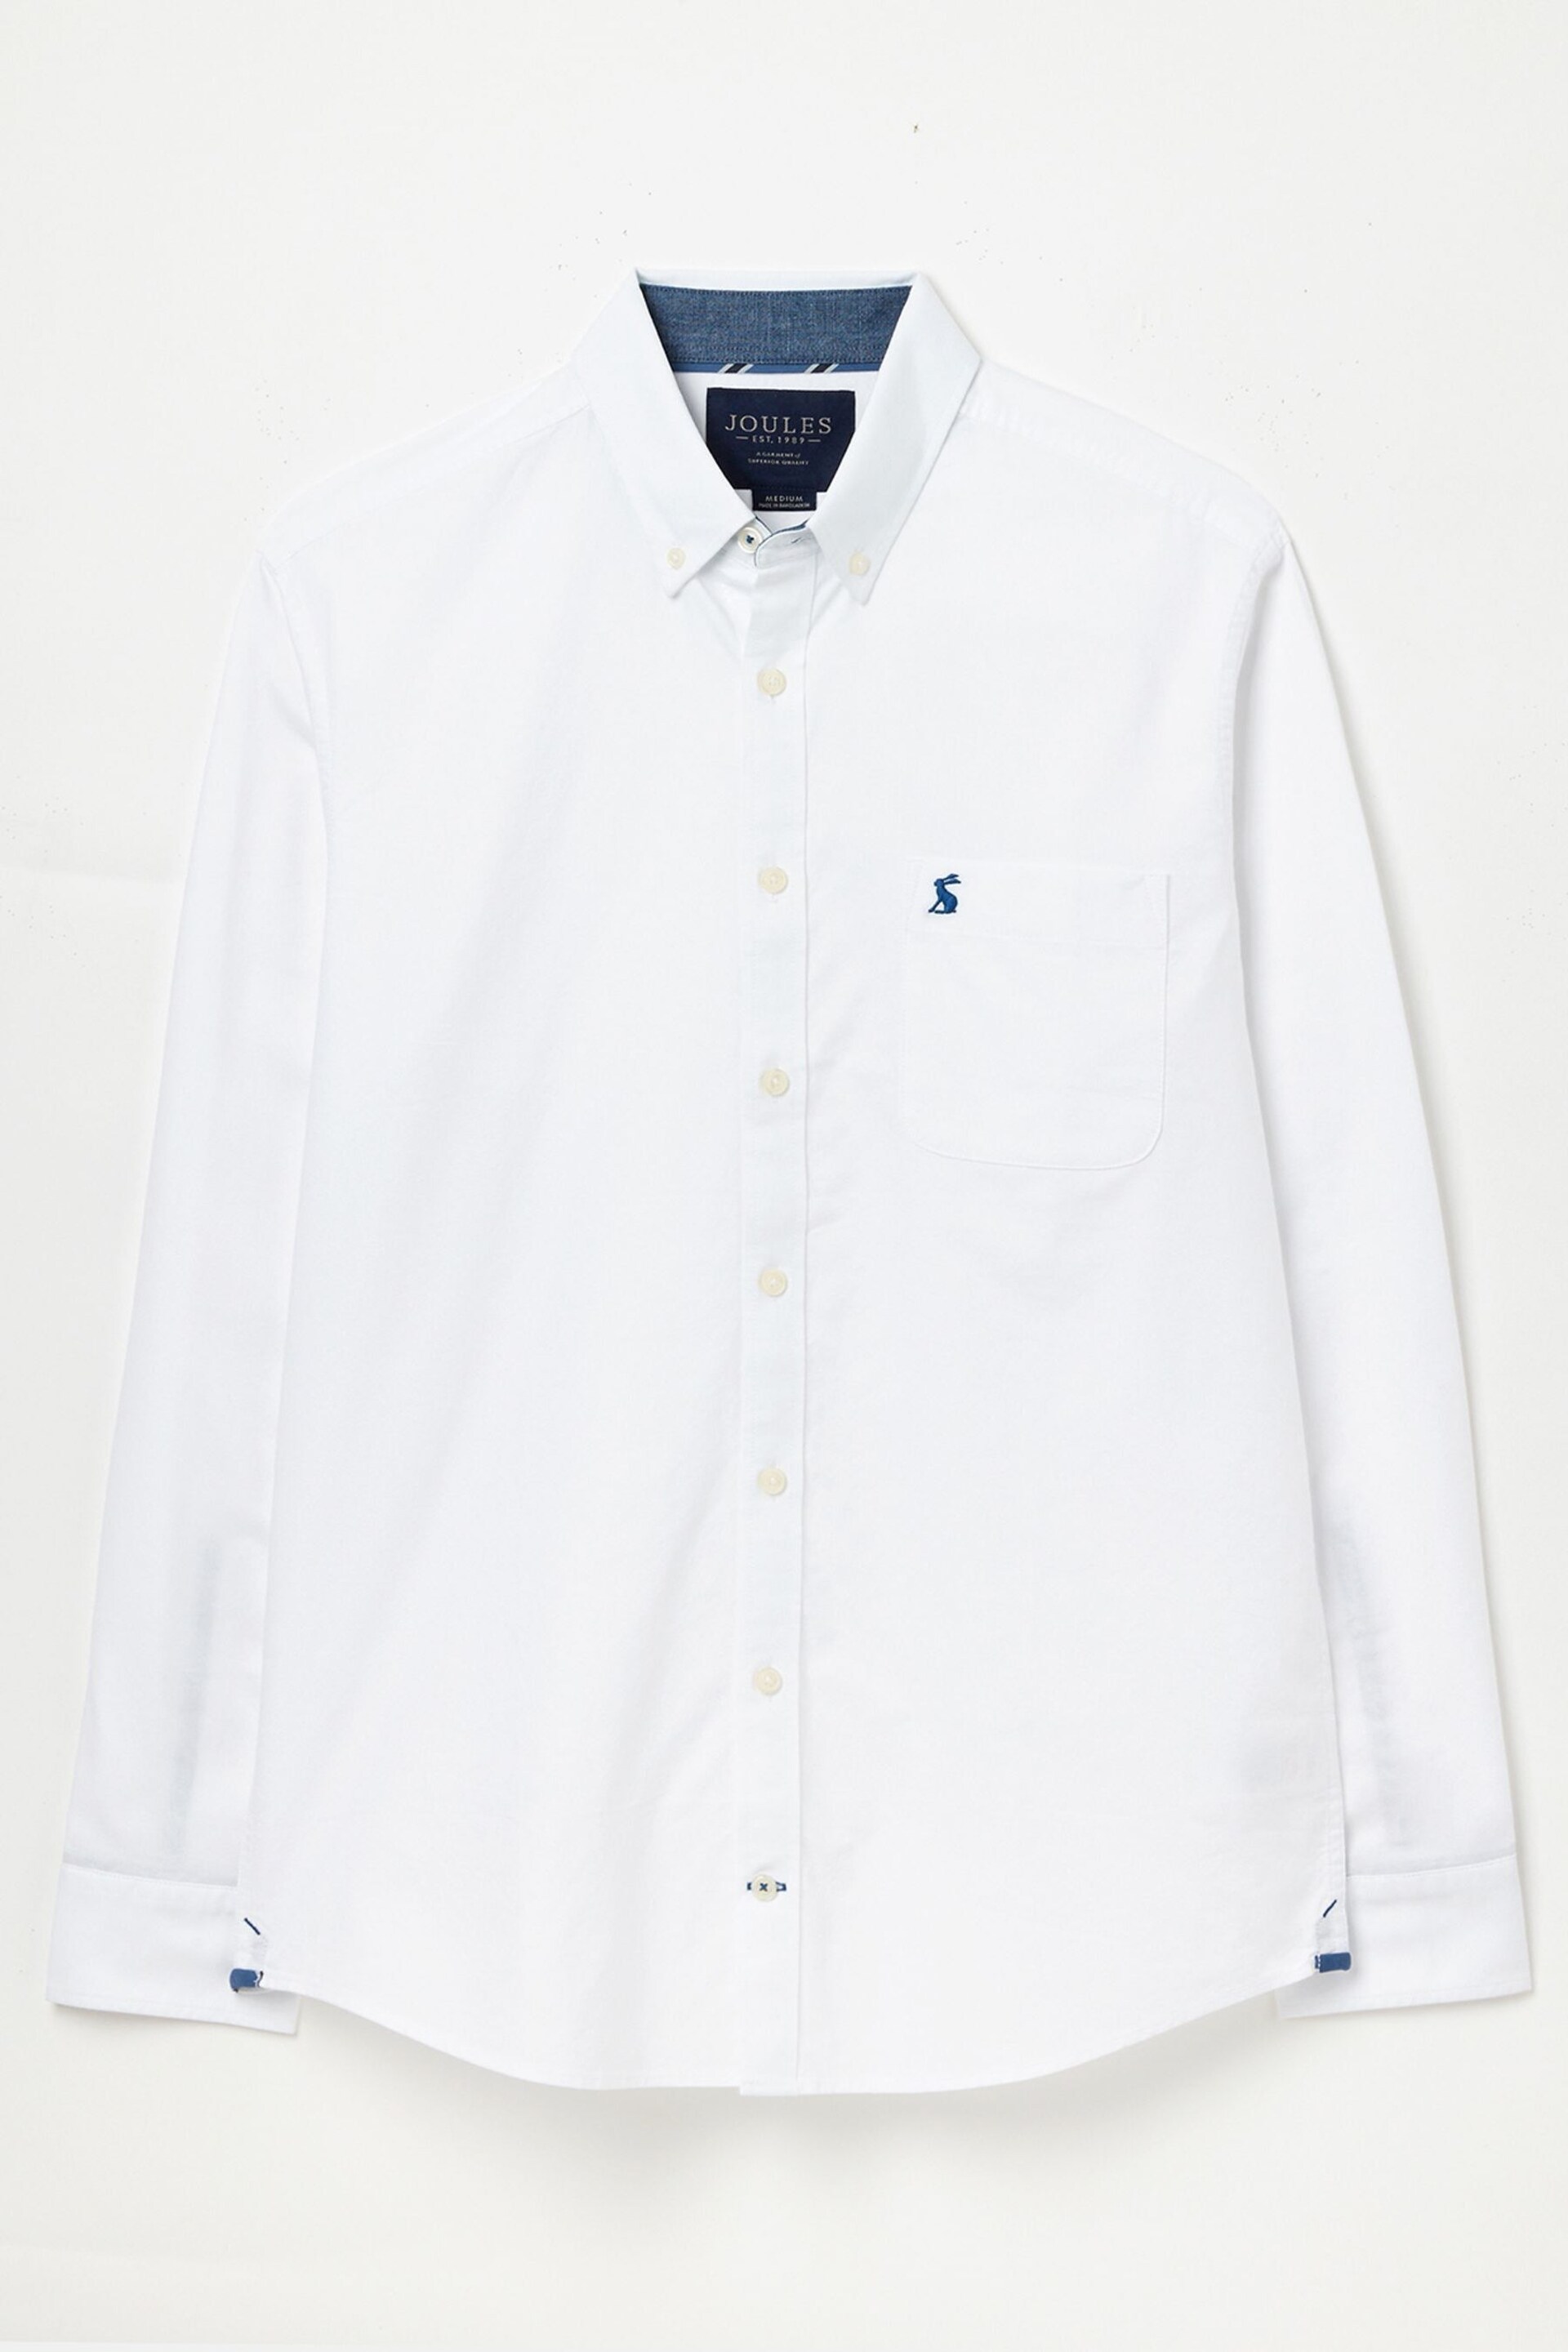 Joules White Classic Fit Cotton Oxford Shirt - Image 7 of 7